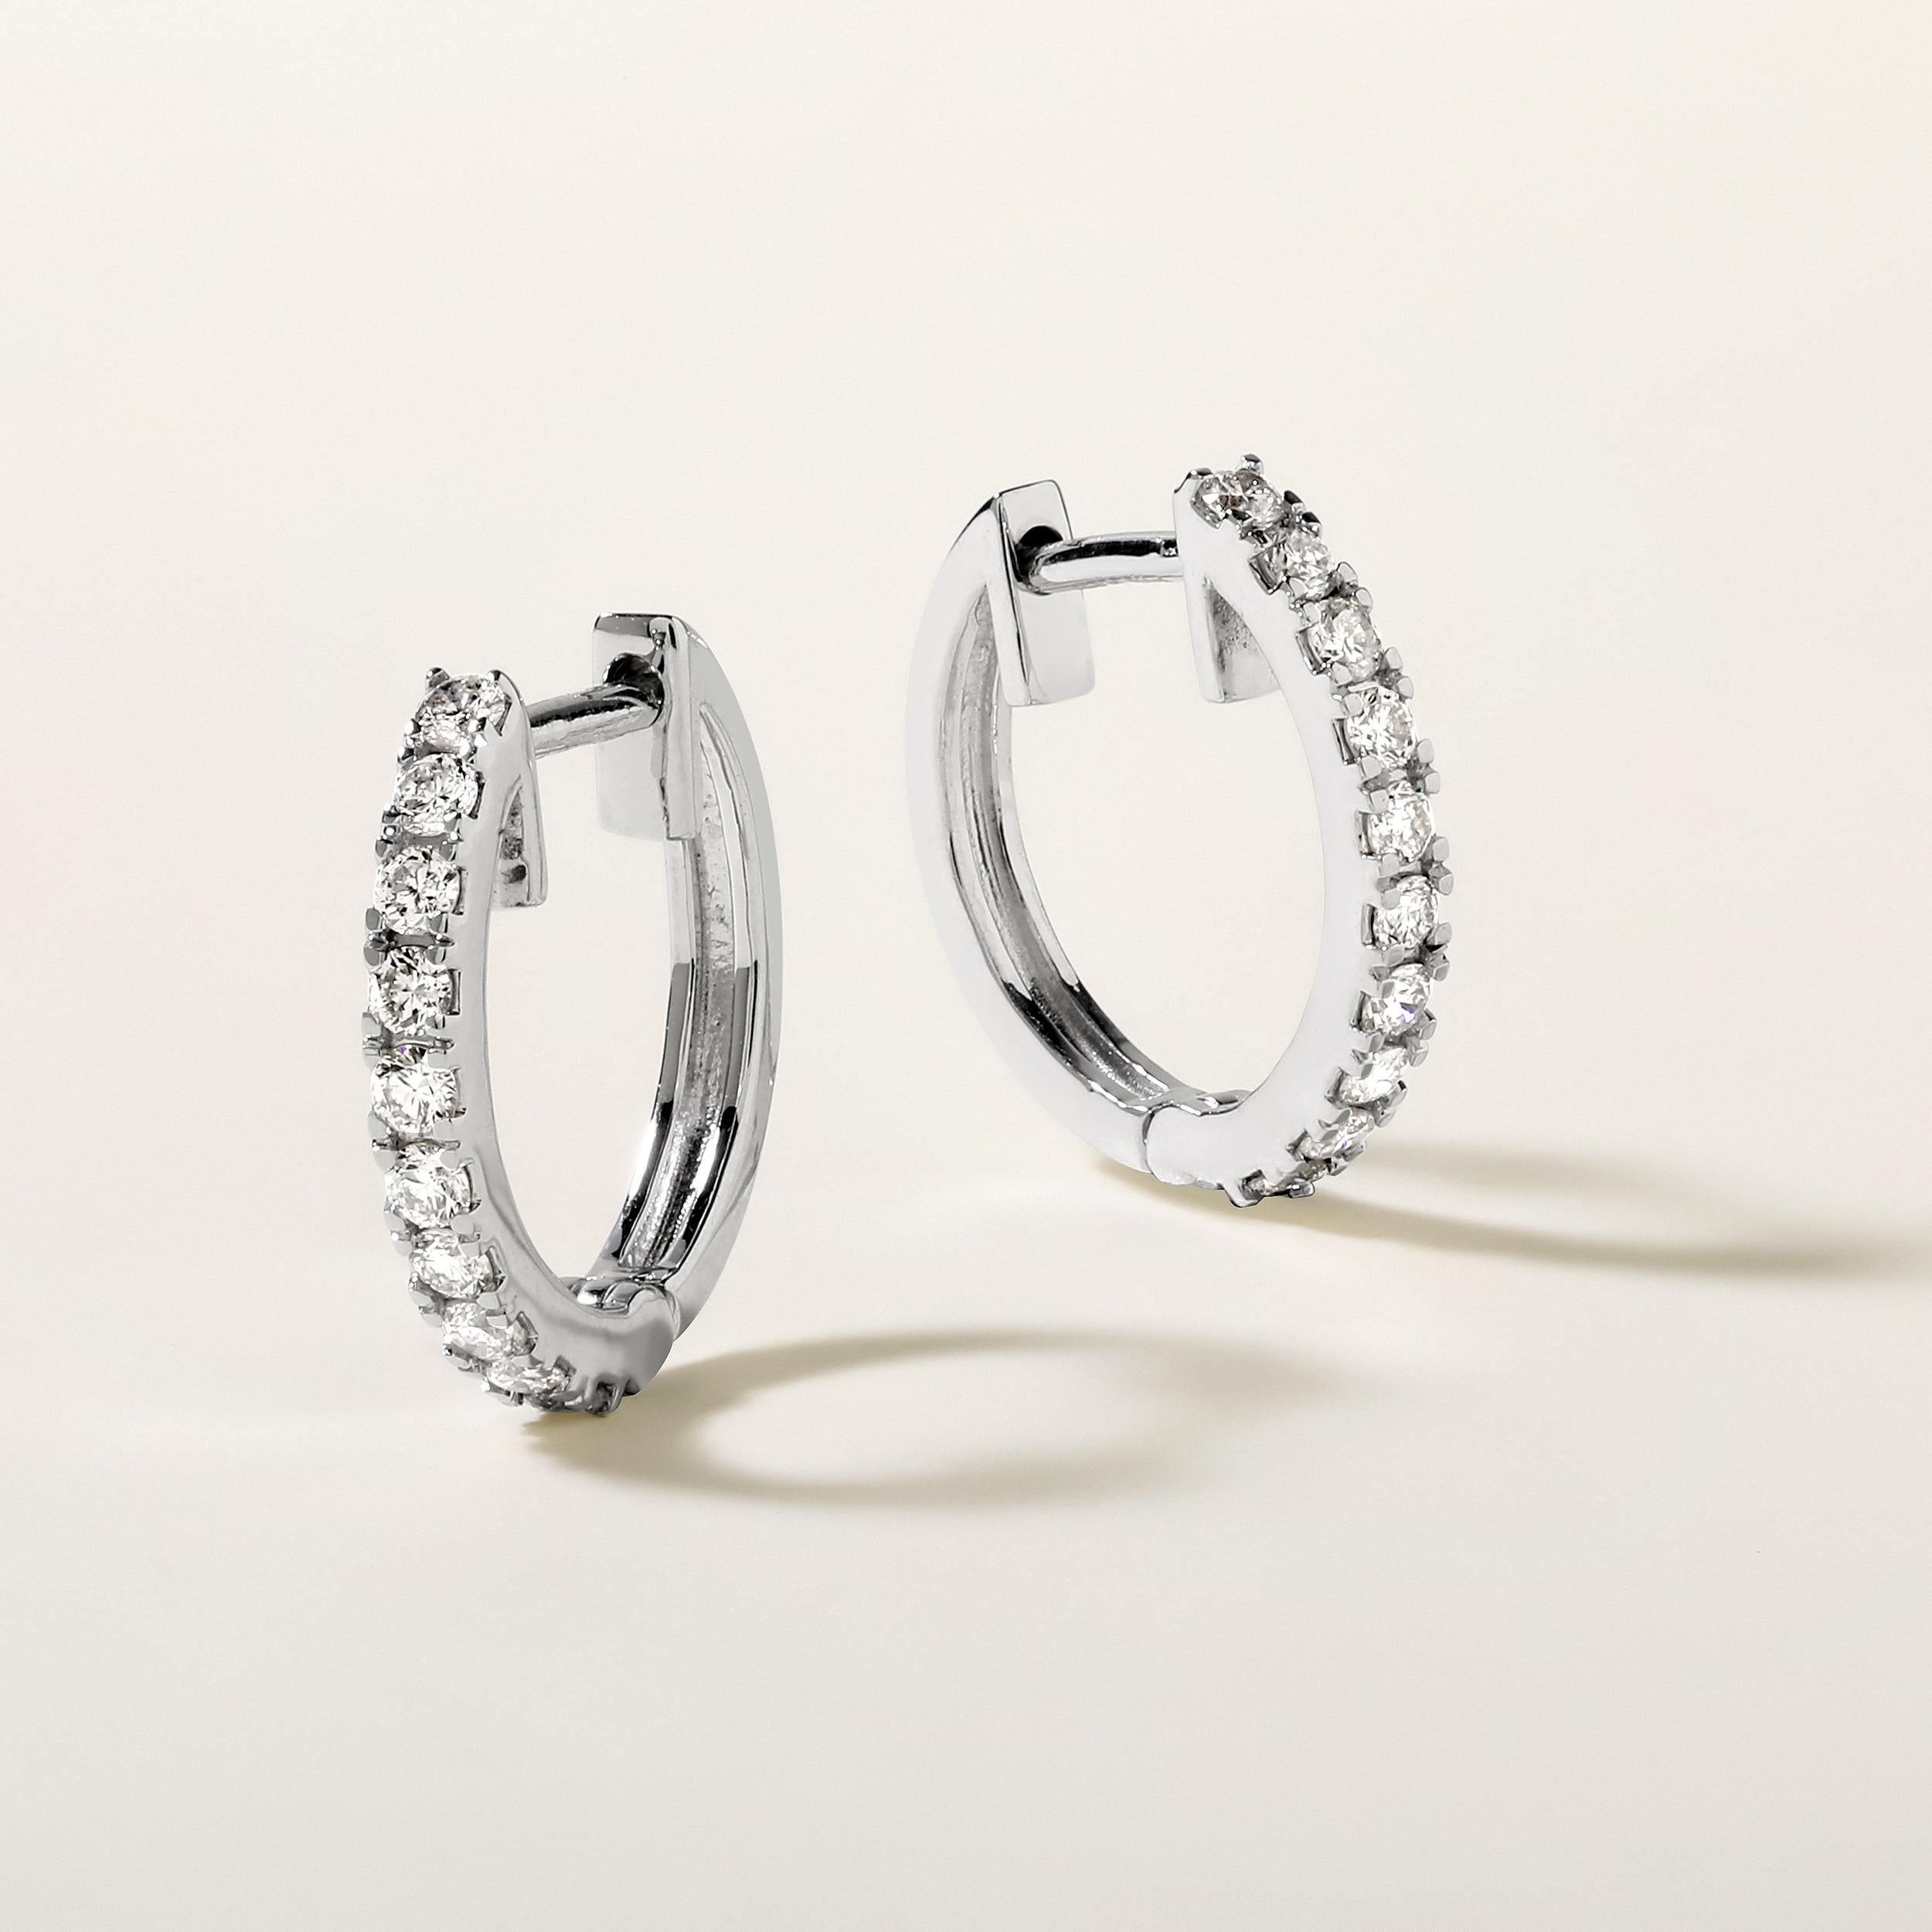 Crafted in 2.14 grams of 14K White Gold, the earrings contains 20 stones of Round Diamonds with a total of 0.35 carat in G-H color and SI clarity.

This jewelry piece will be expertly crafted by our skilled artisans upon order. Allow us a shipping